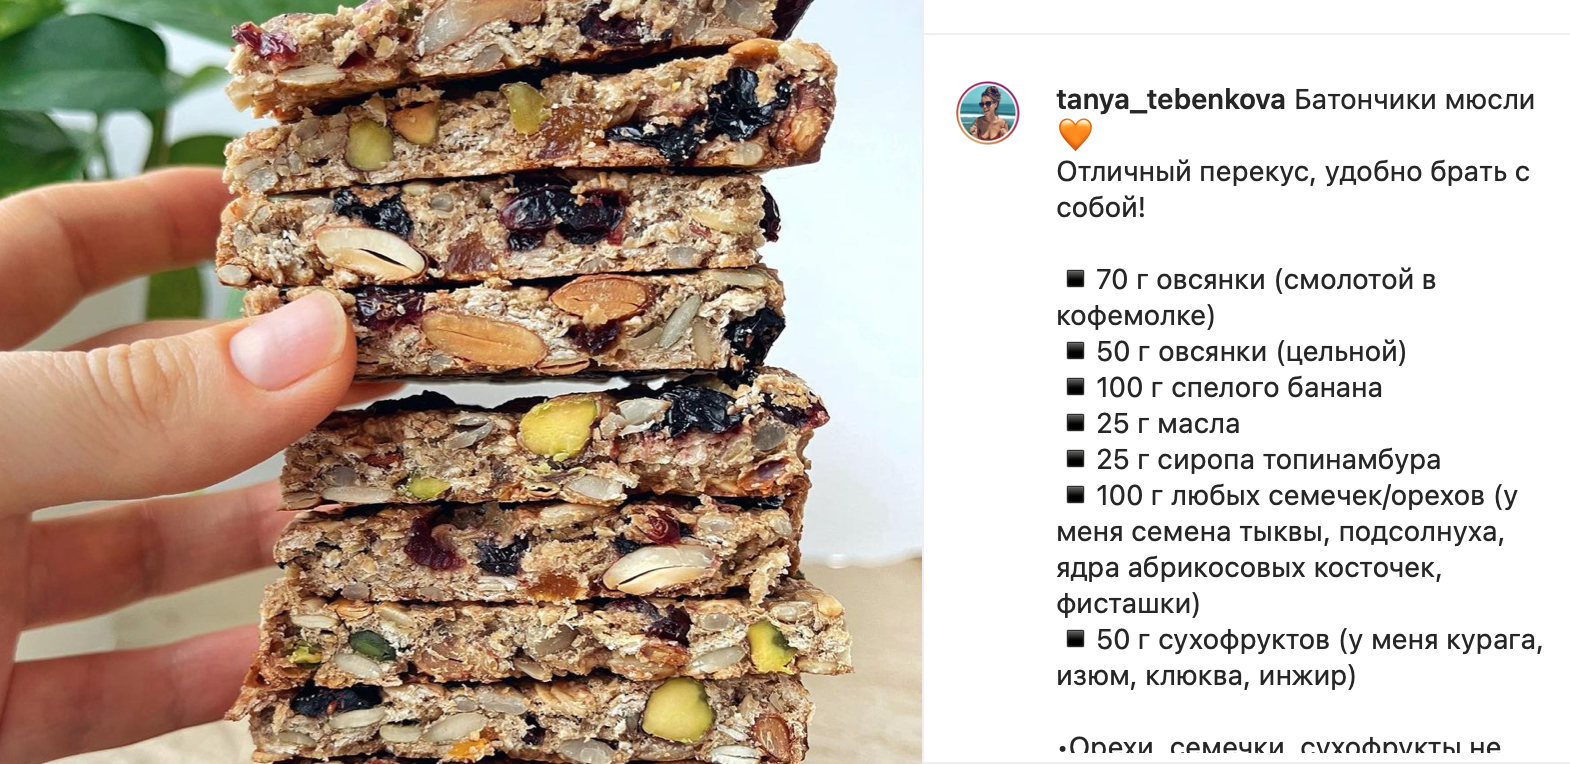 Recipe for healthy bars